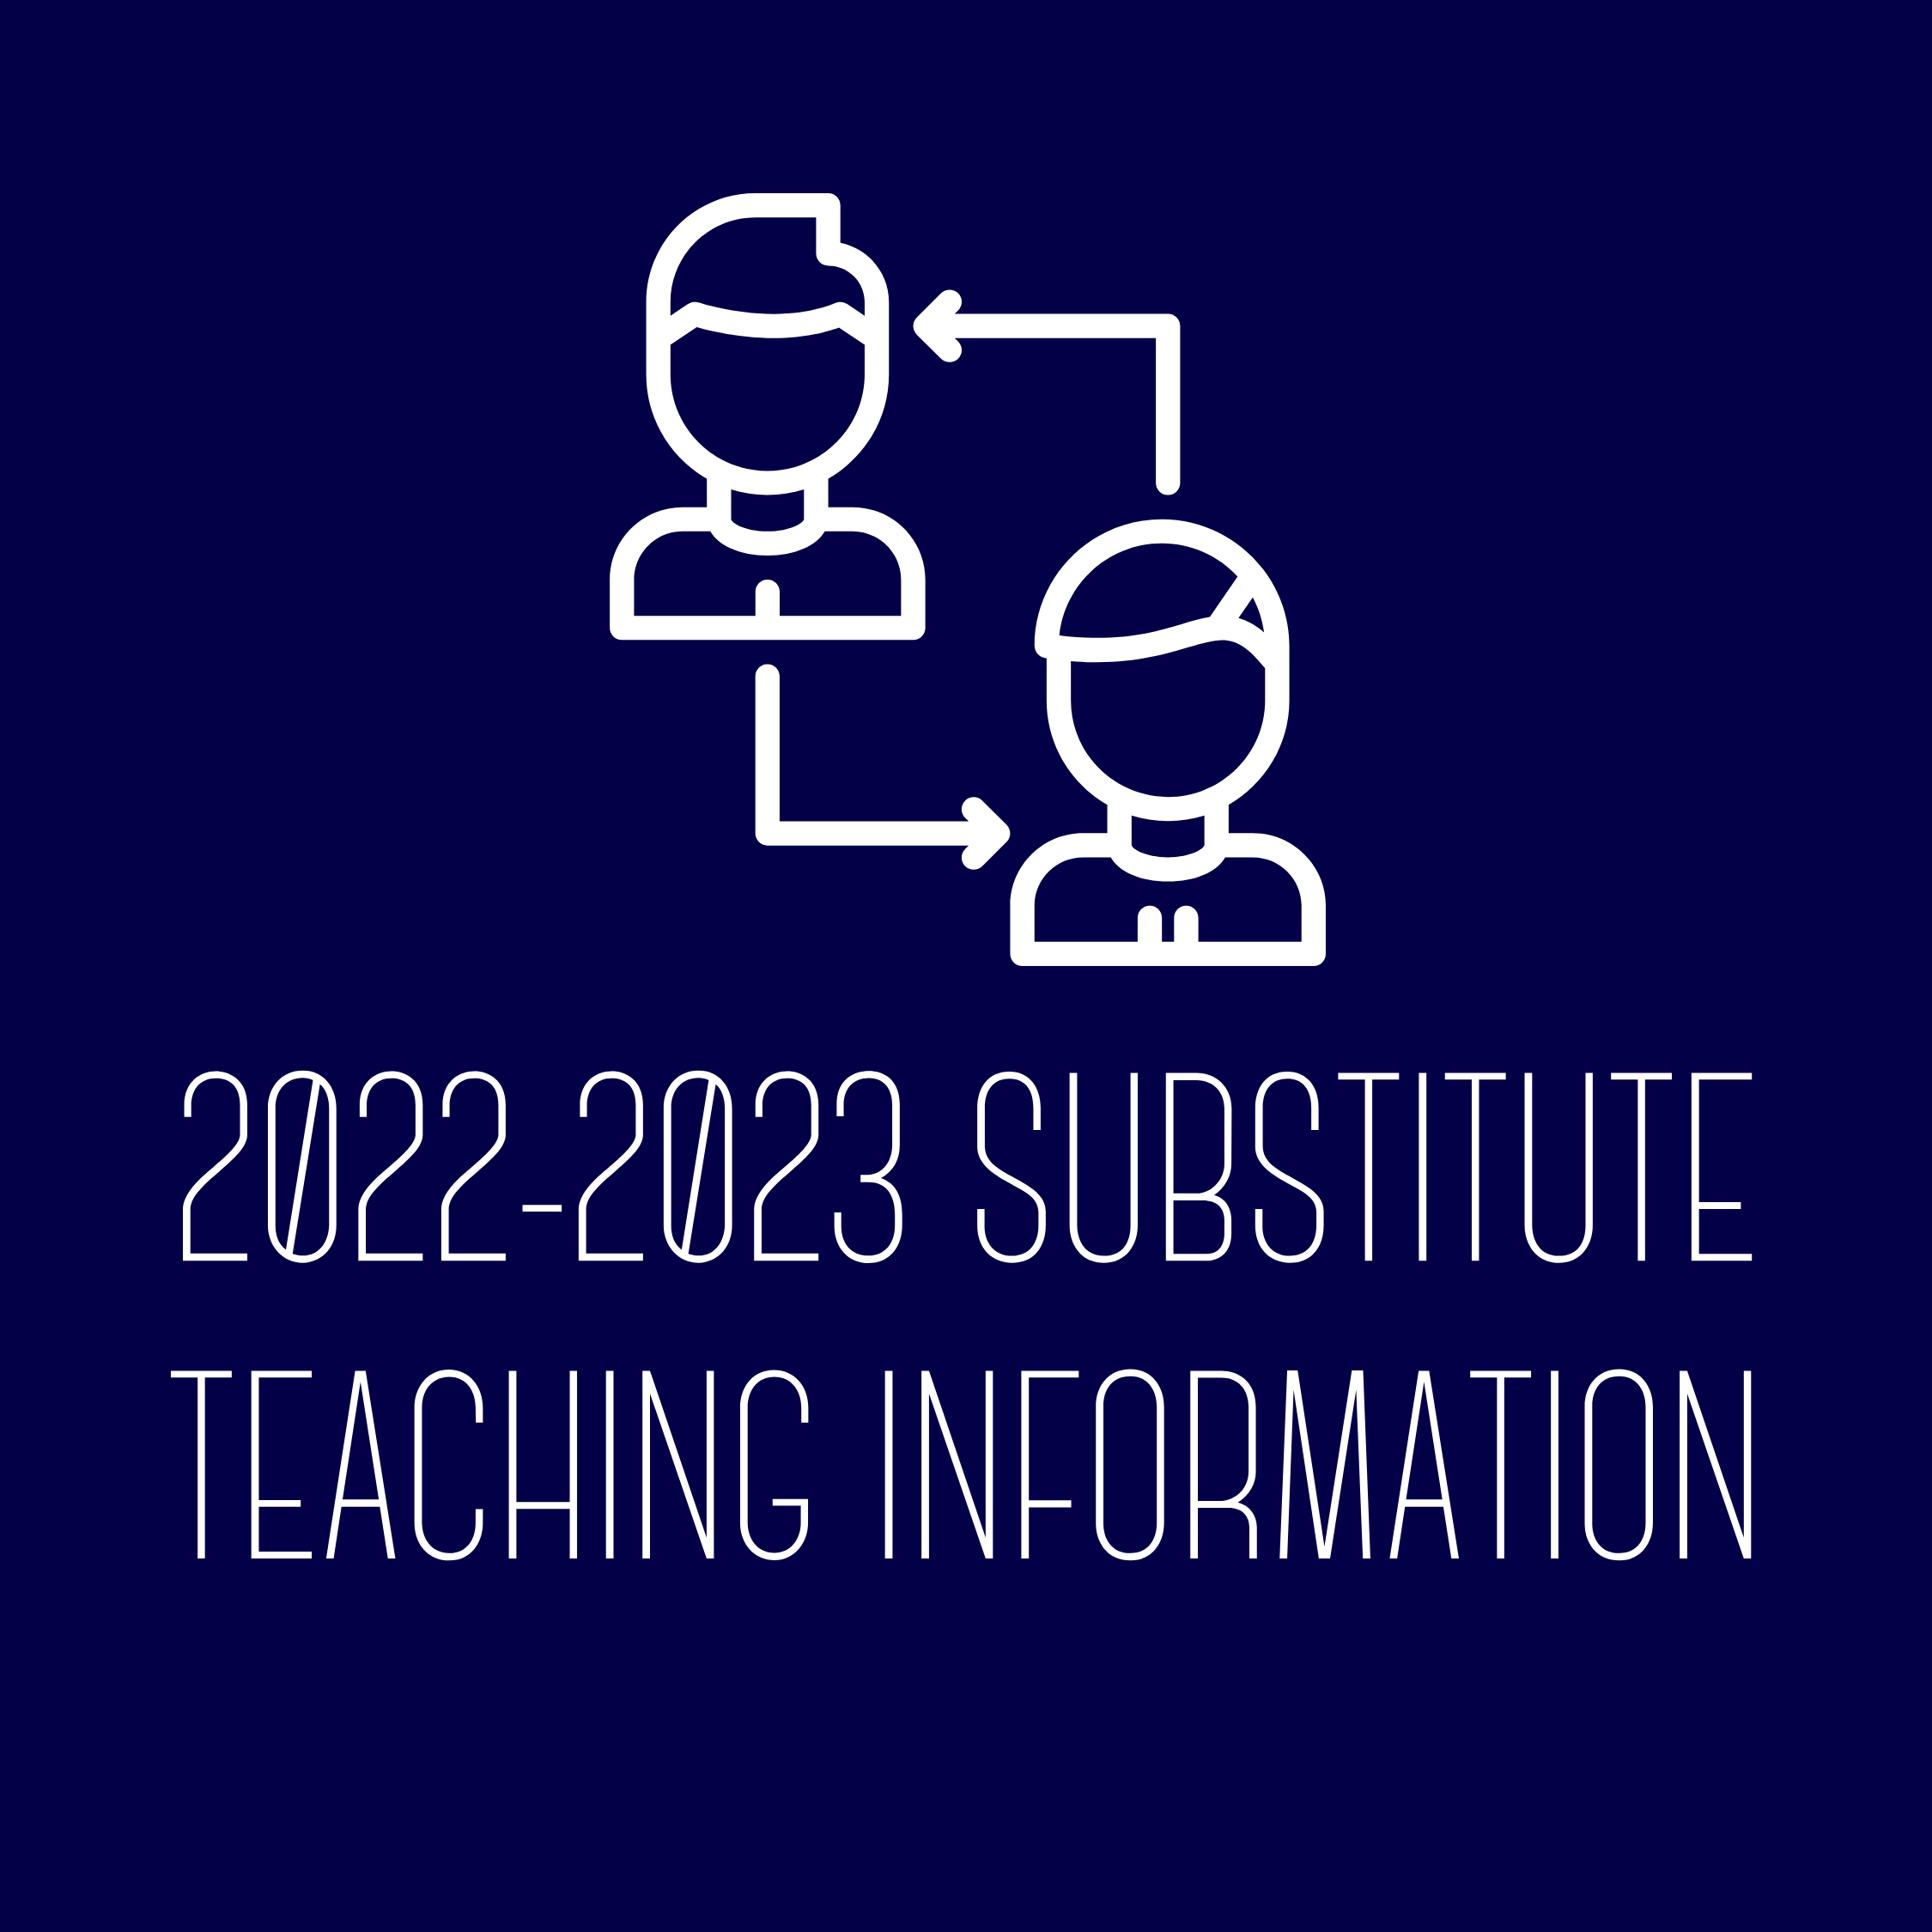 2022-2023 Substitute Teaching information